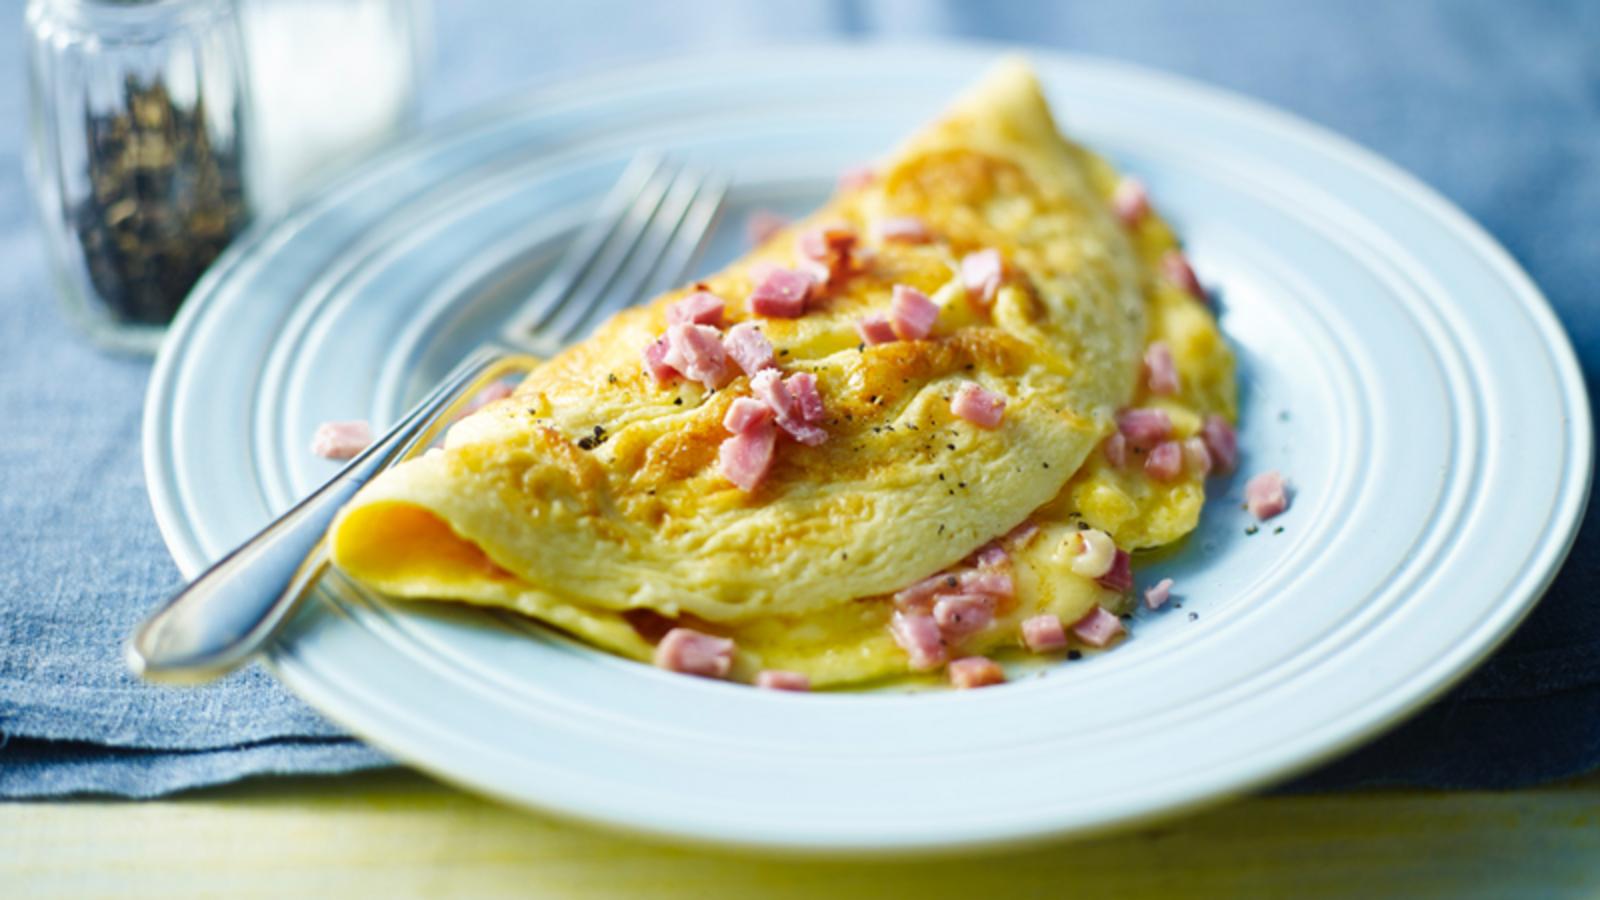 Omelette recipes - BBC Food